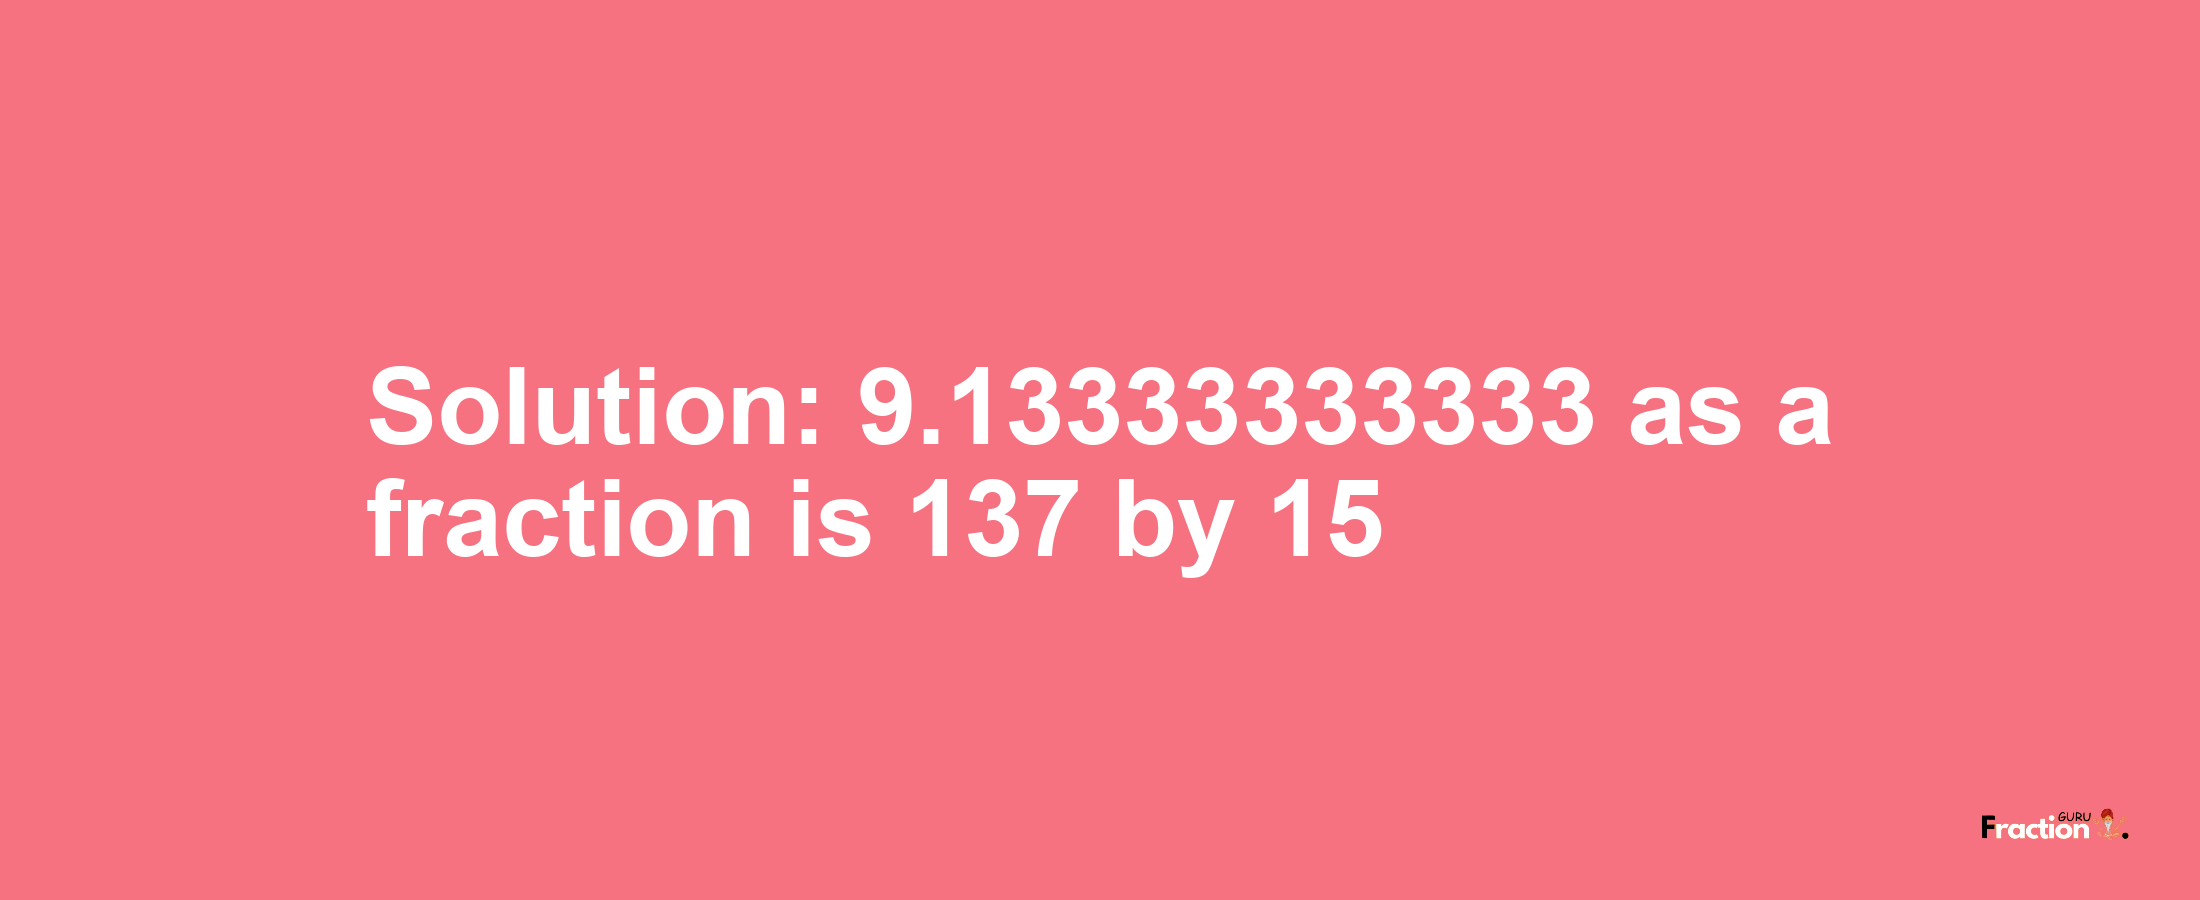 Solution:9.13333333333 as a fraction is 137/15